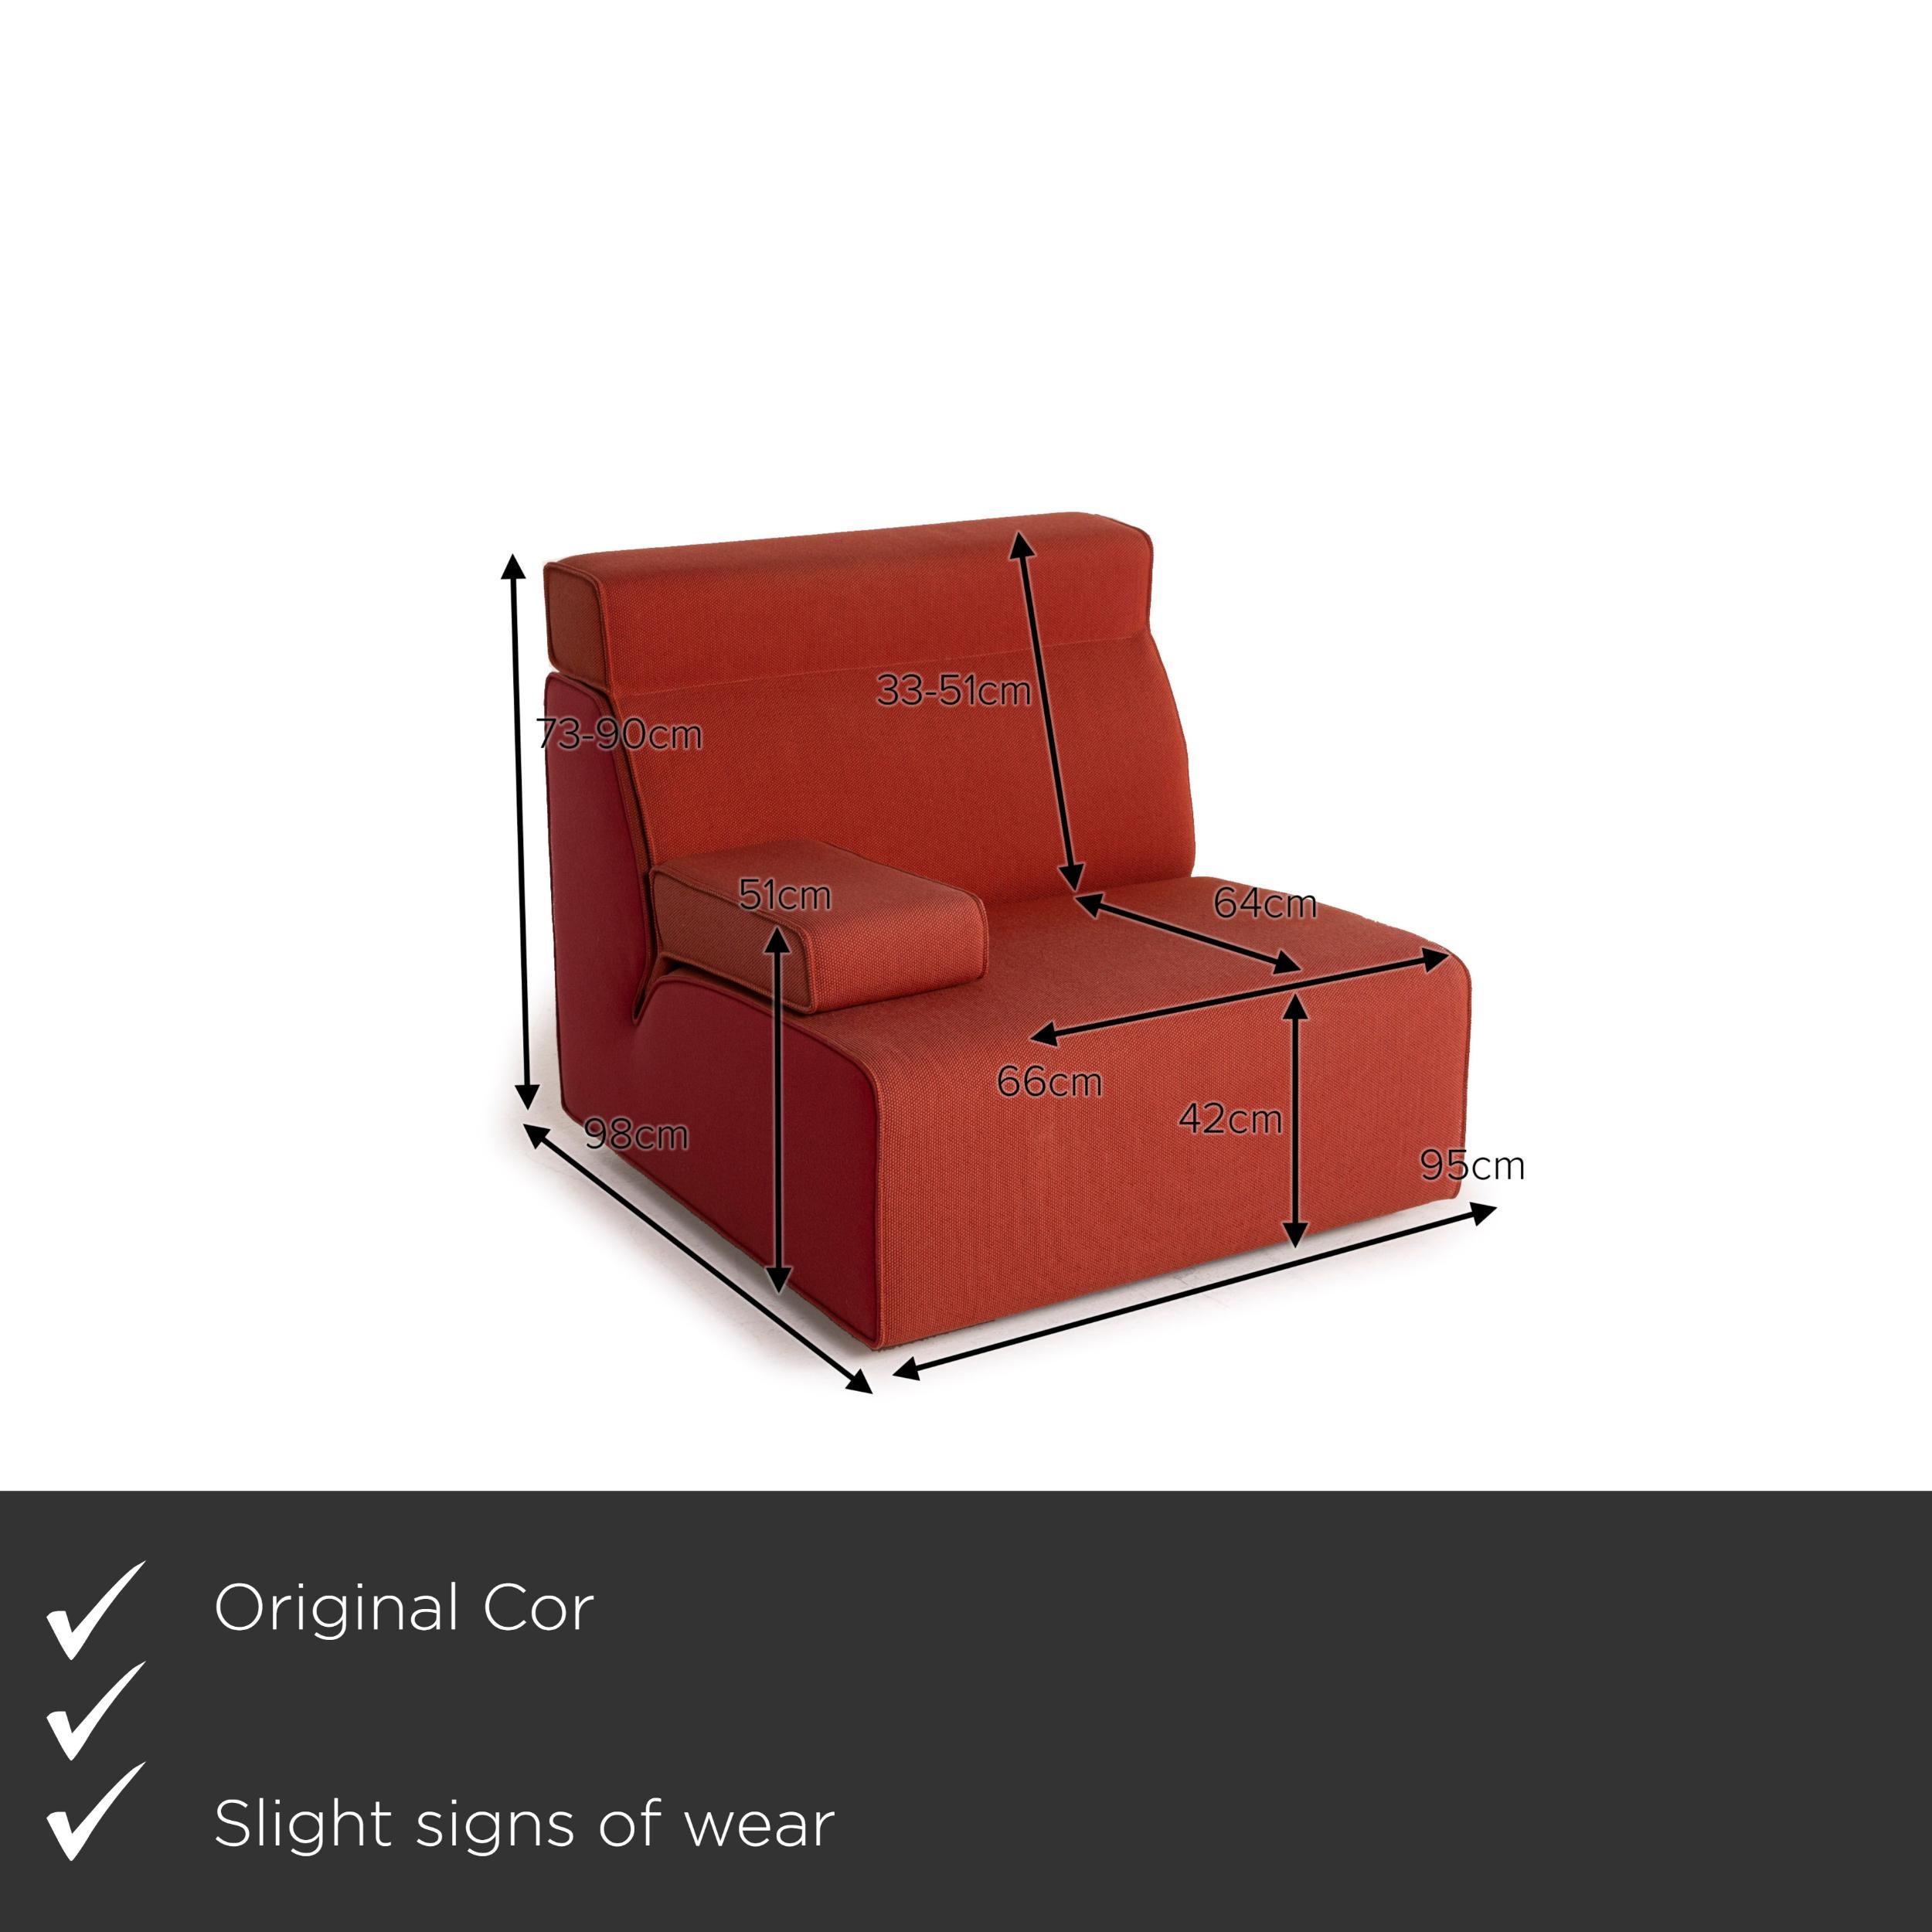 We present to you a Cor Kelp fabric armchair Orange Modular.
 
 

 Product measurements in centimeters:
 

Depth 98
Width 95
Height 73
Seat height 42
Rest height 51
Seat depth 64
Seat width 66
Back height 33.